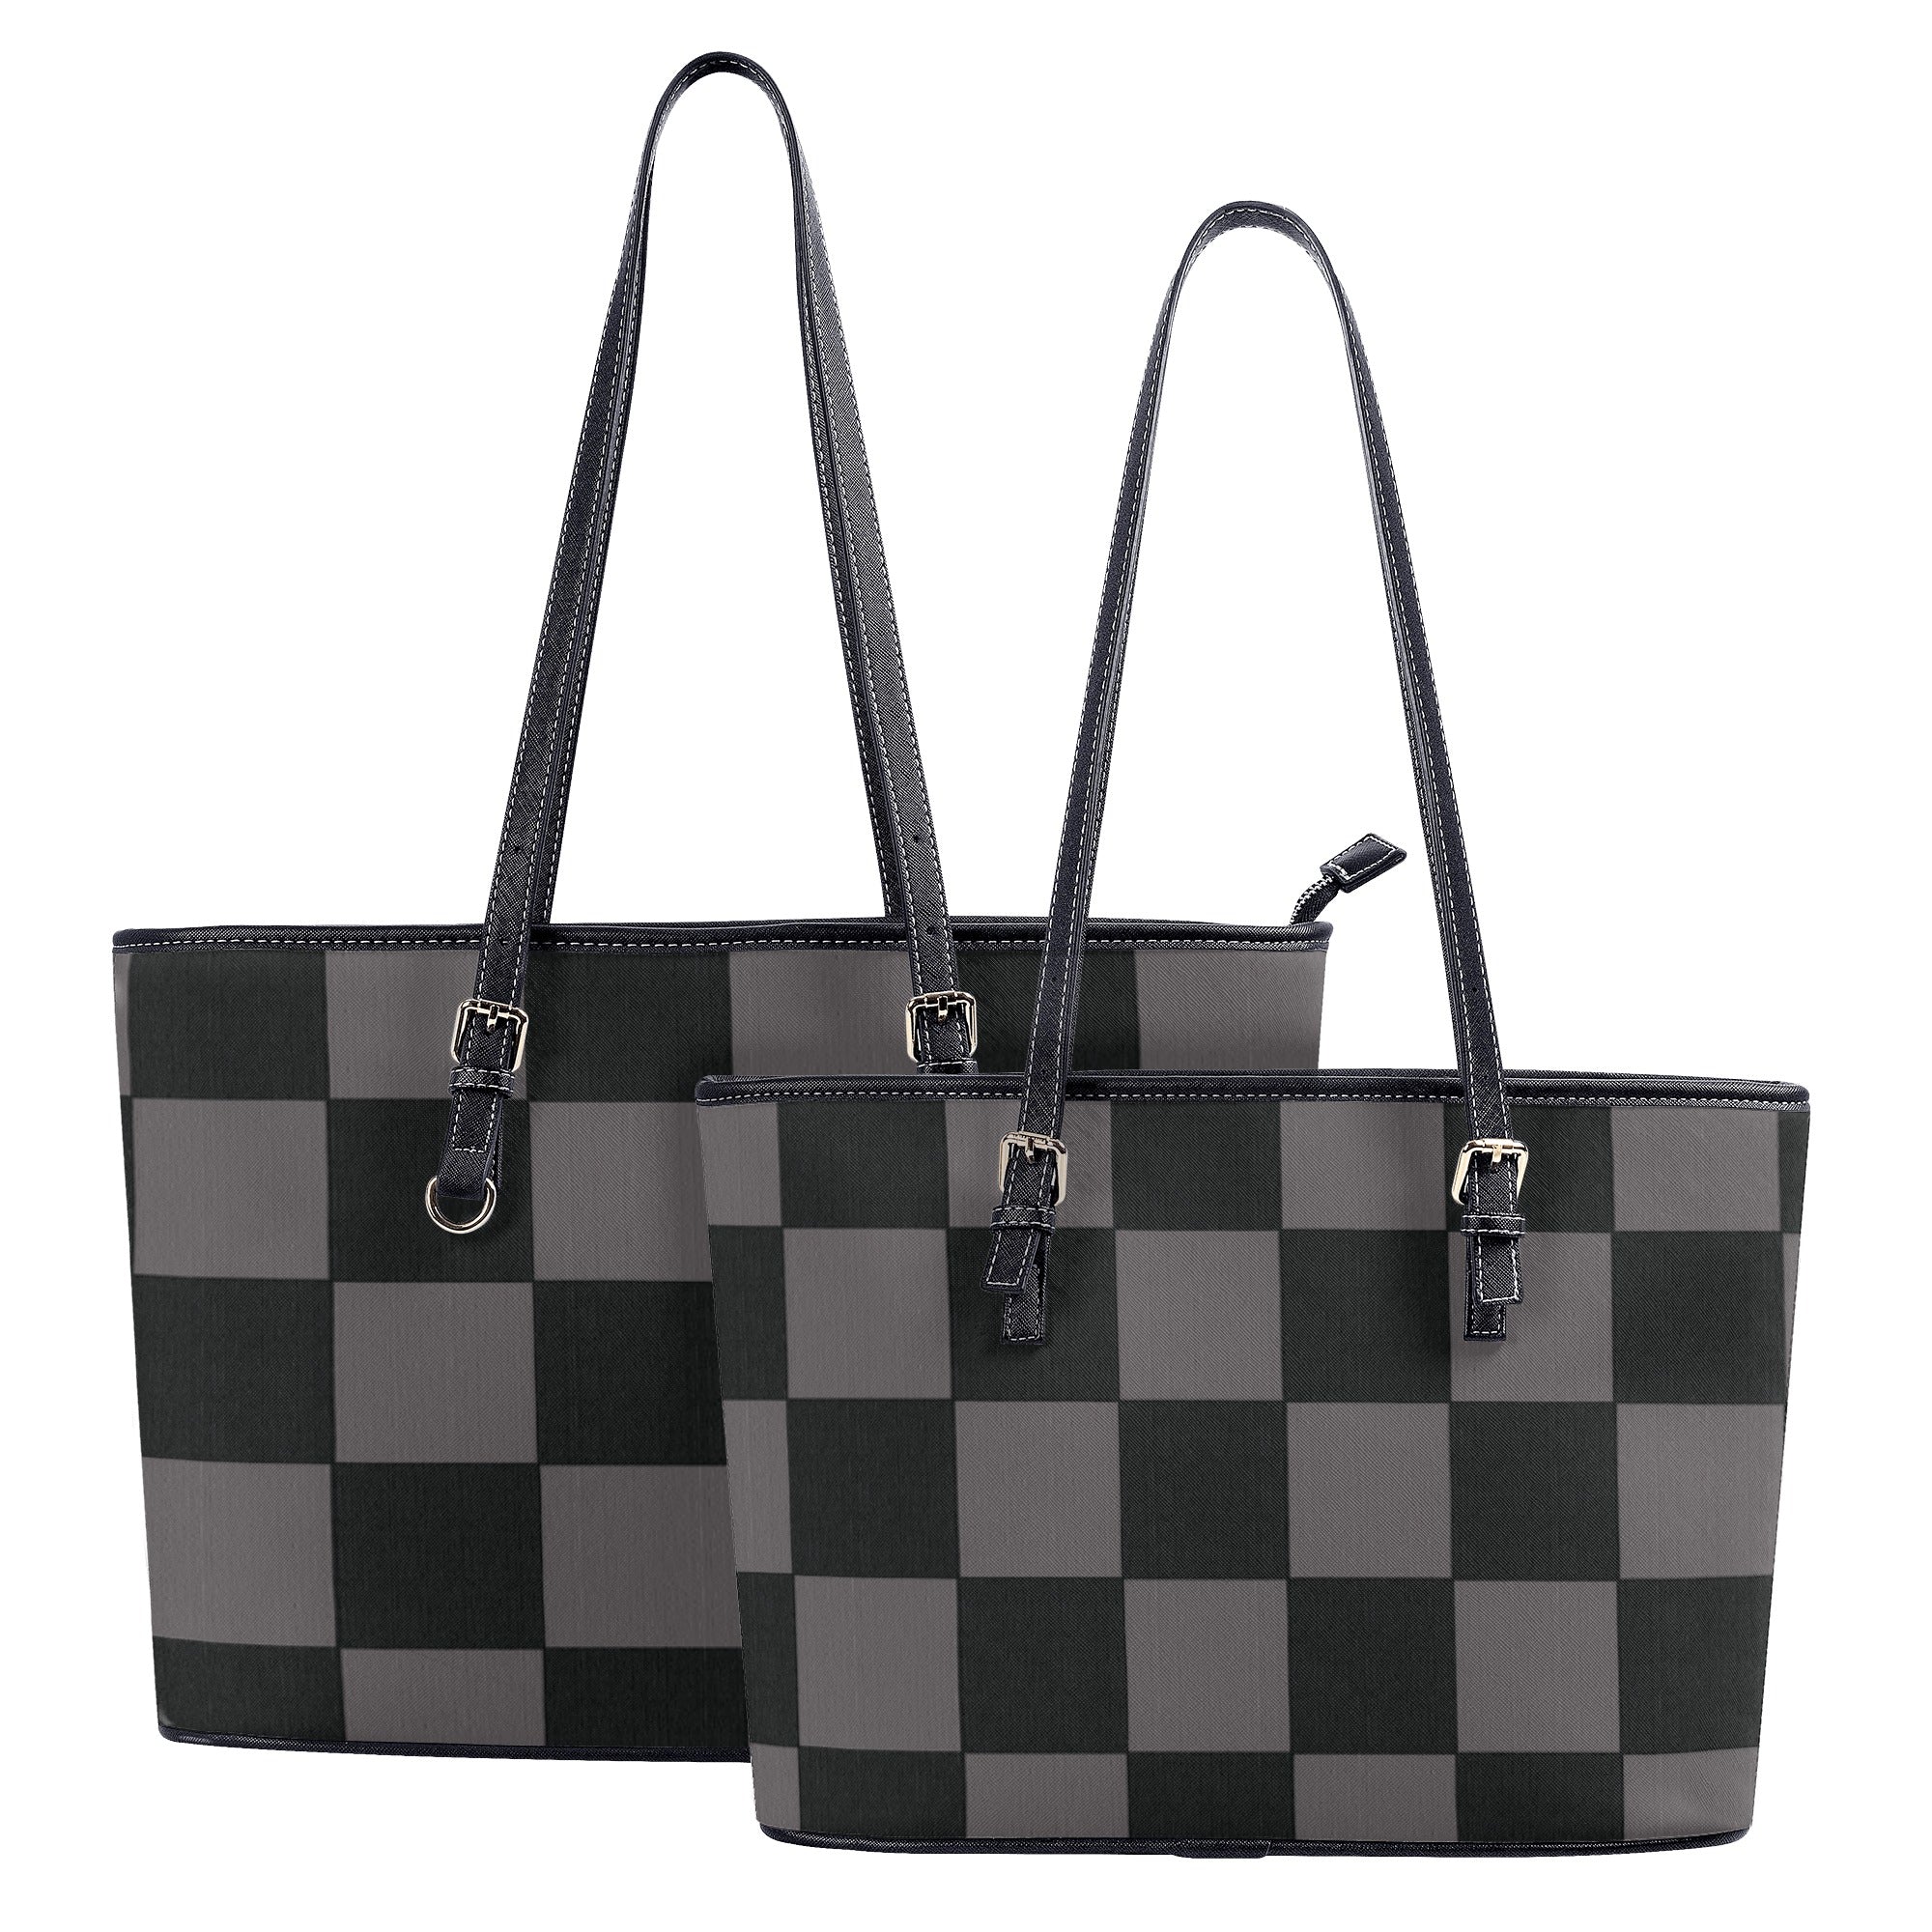 Classic Plaid Design Hand Held Business Luggage Travel Bag Tote Bag